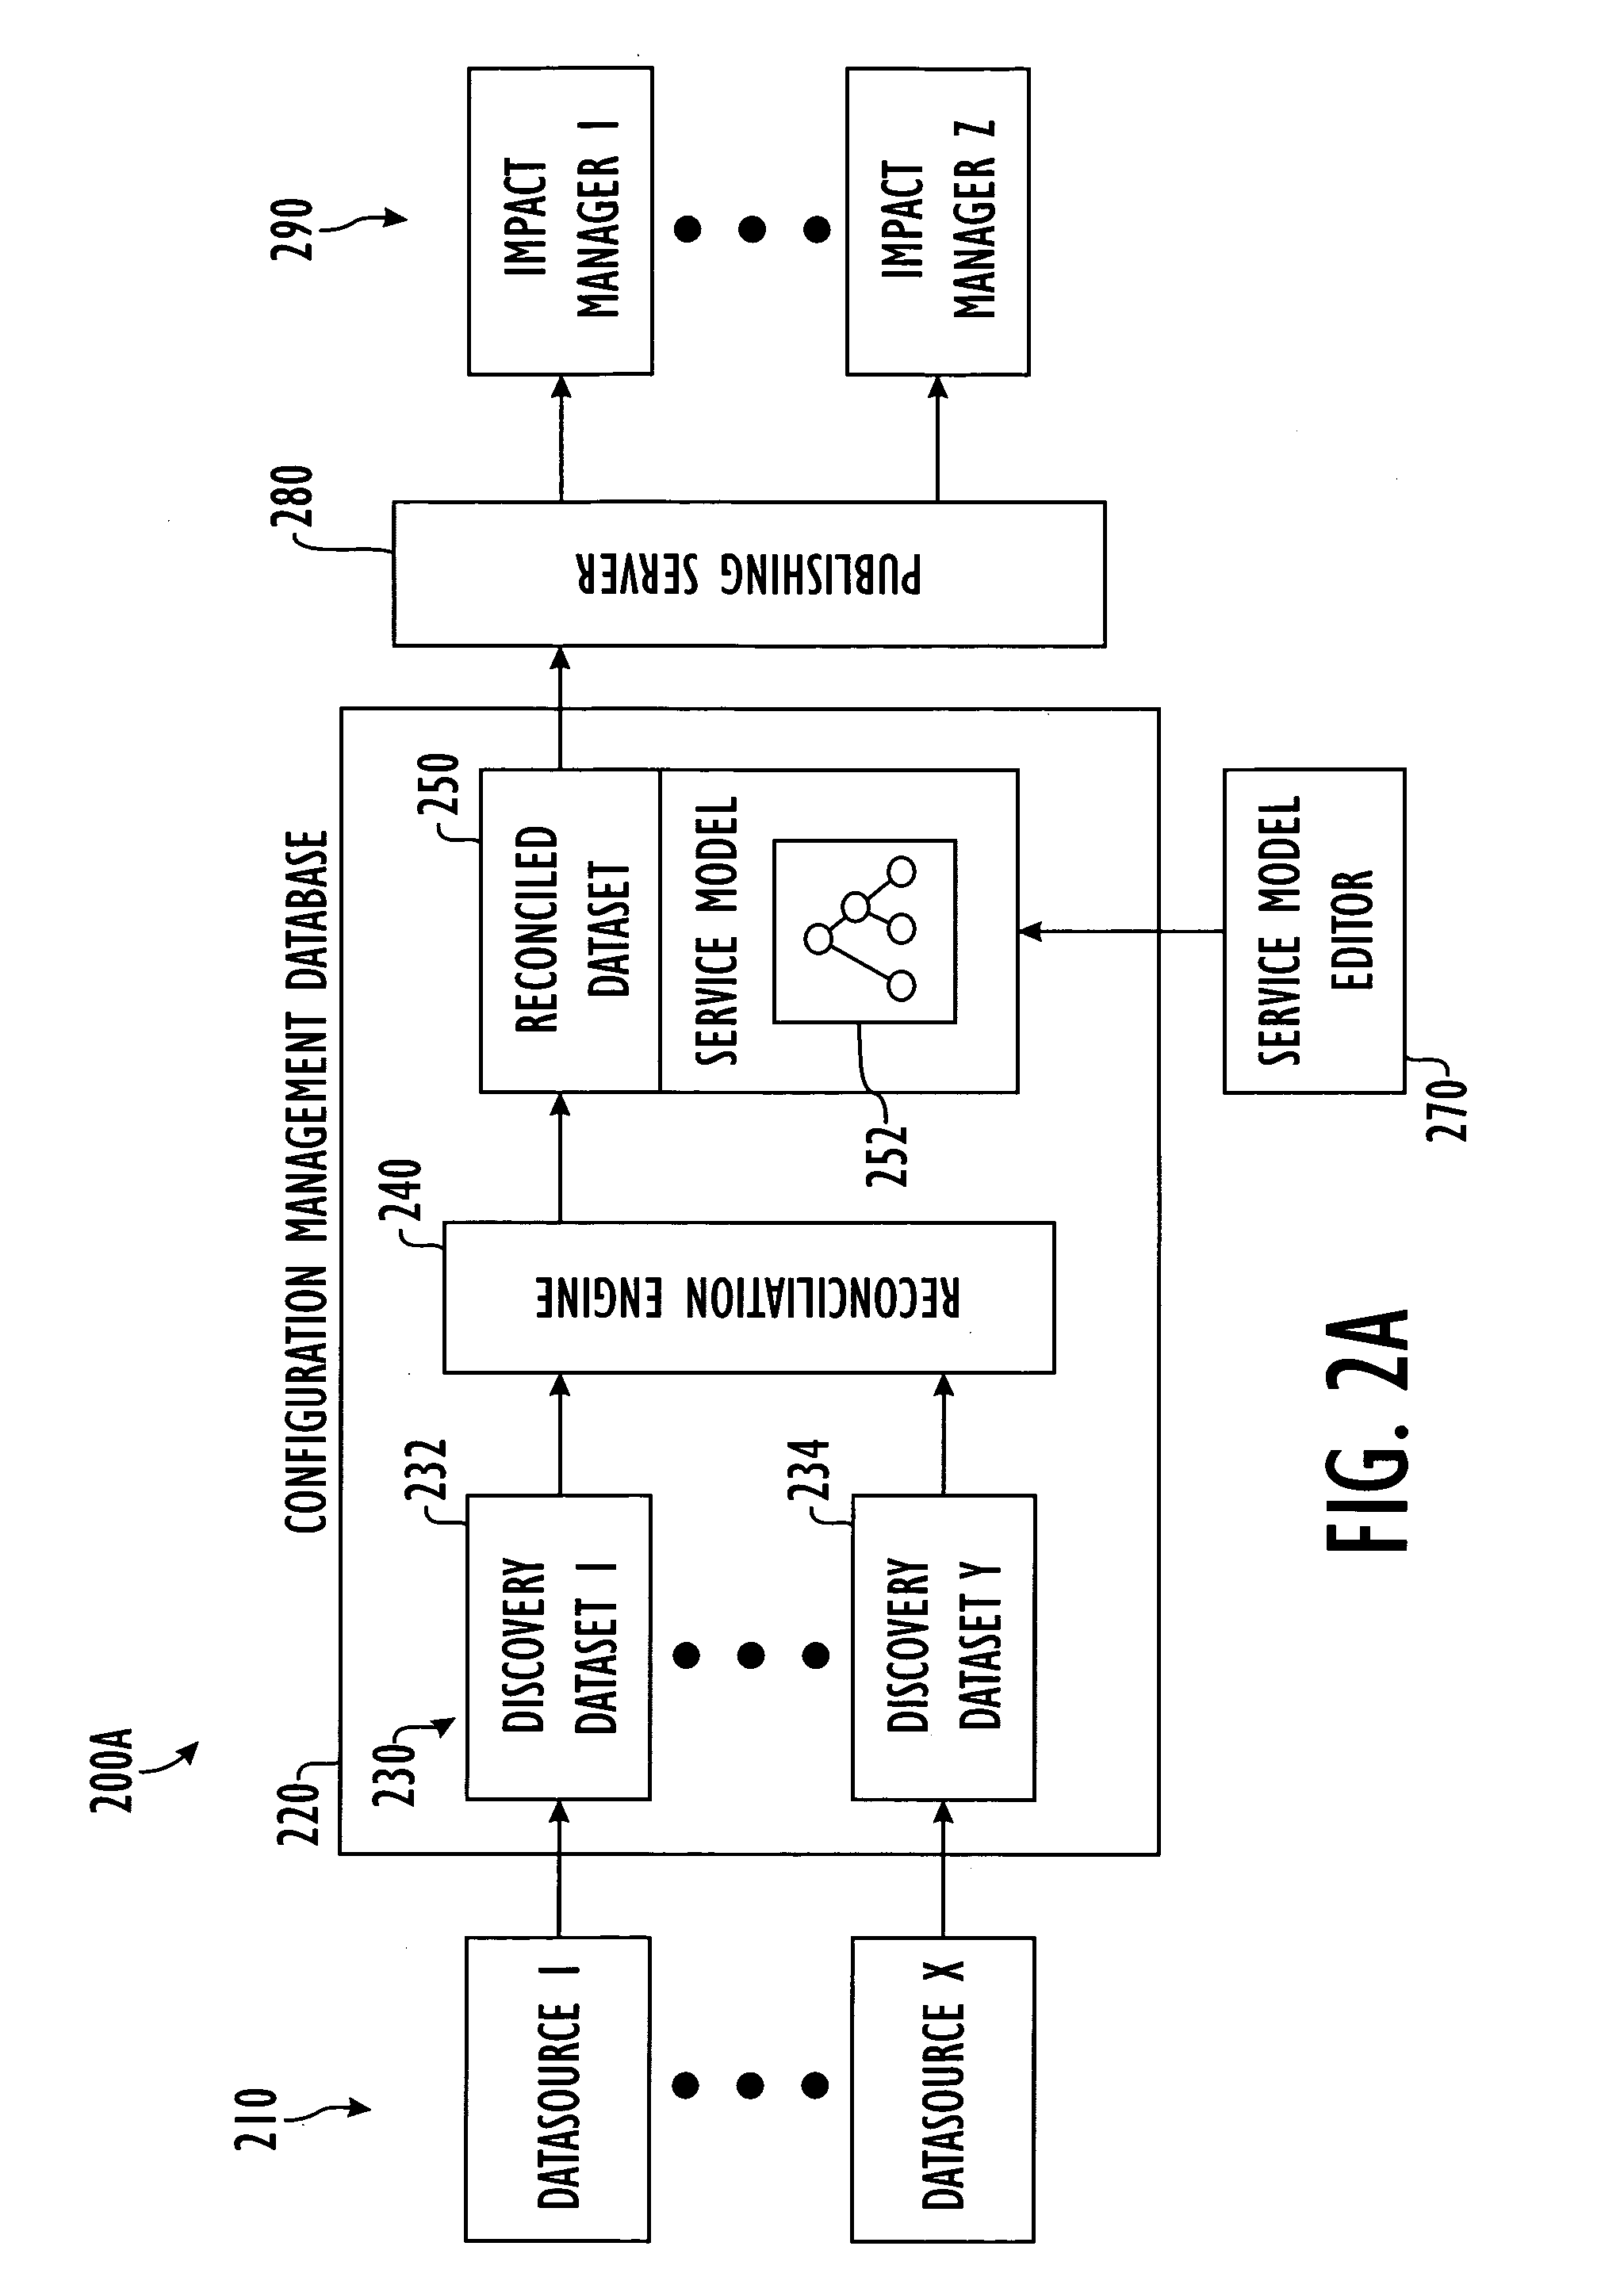 System and method for building business service model